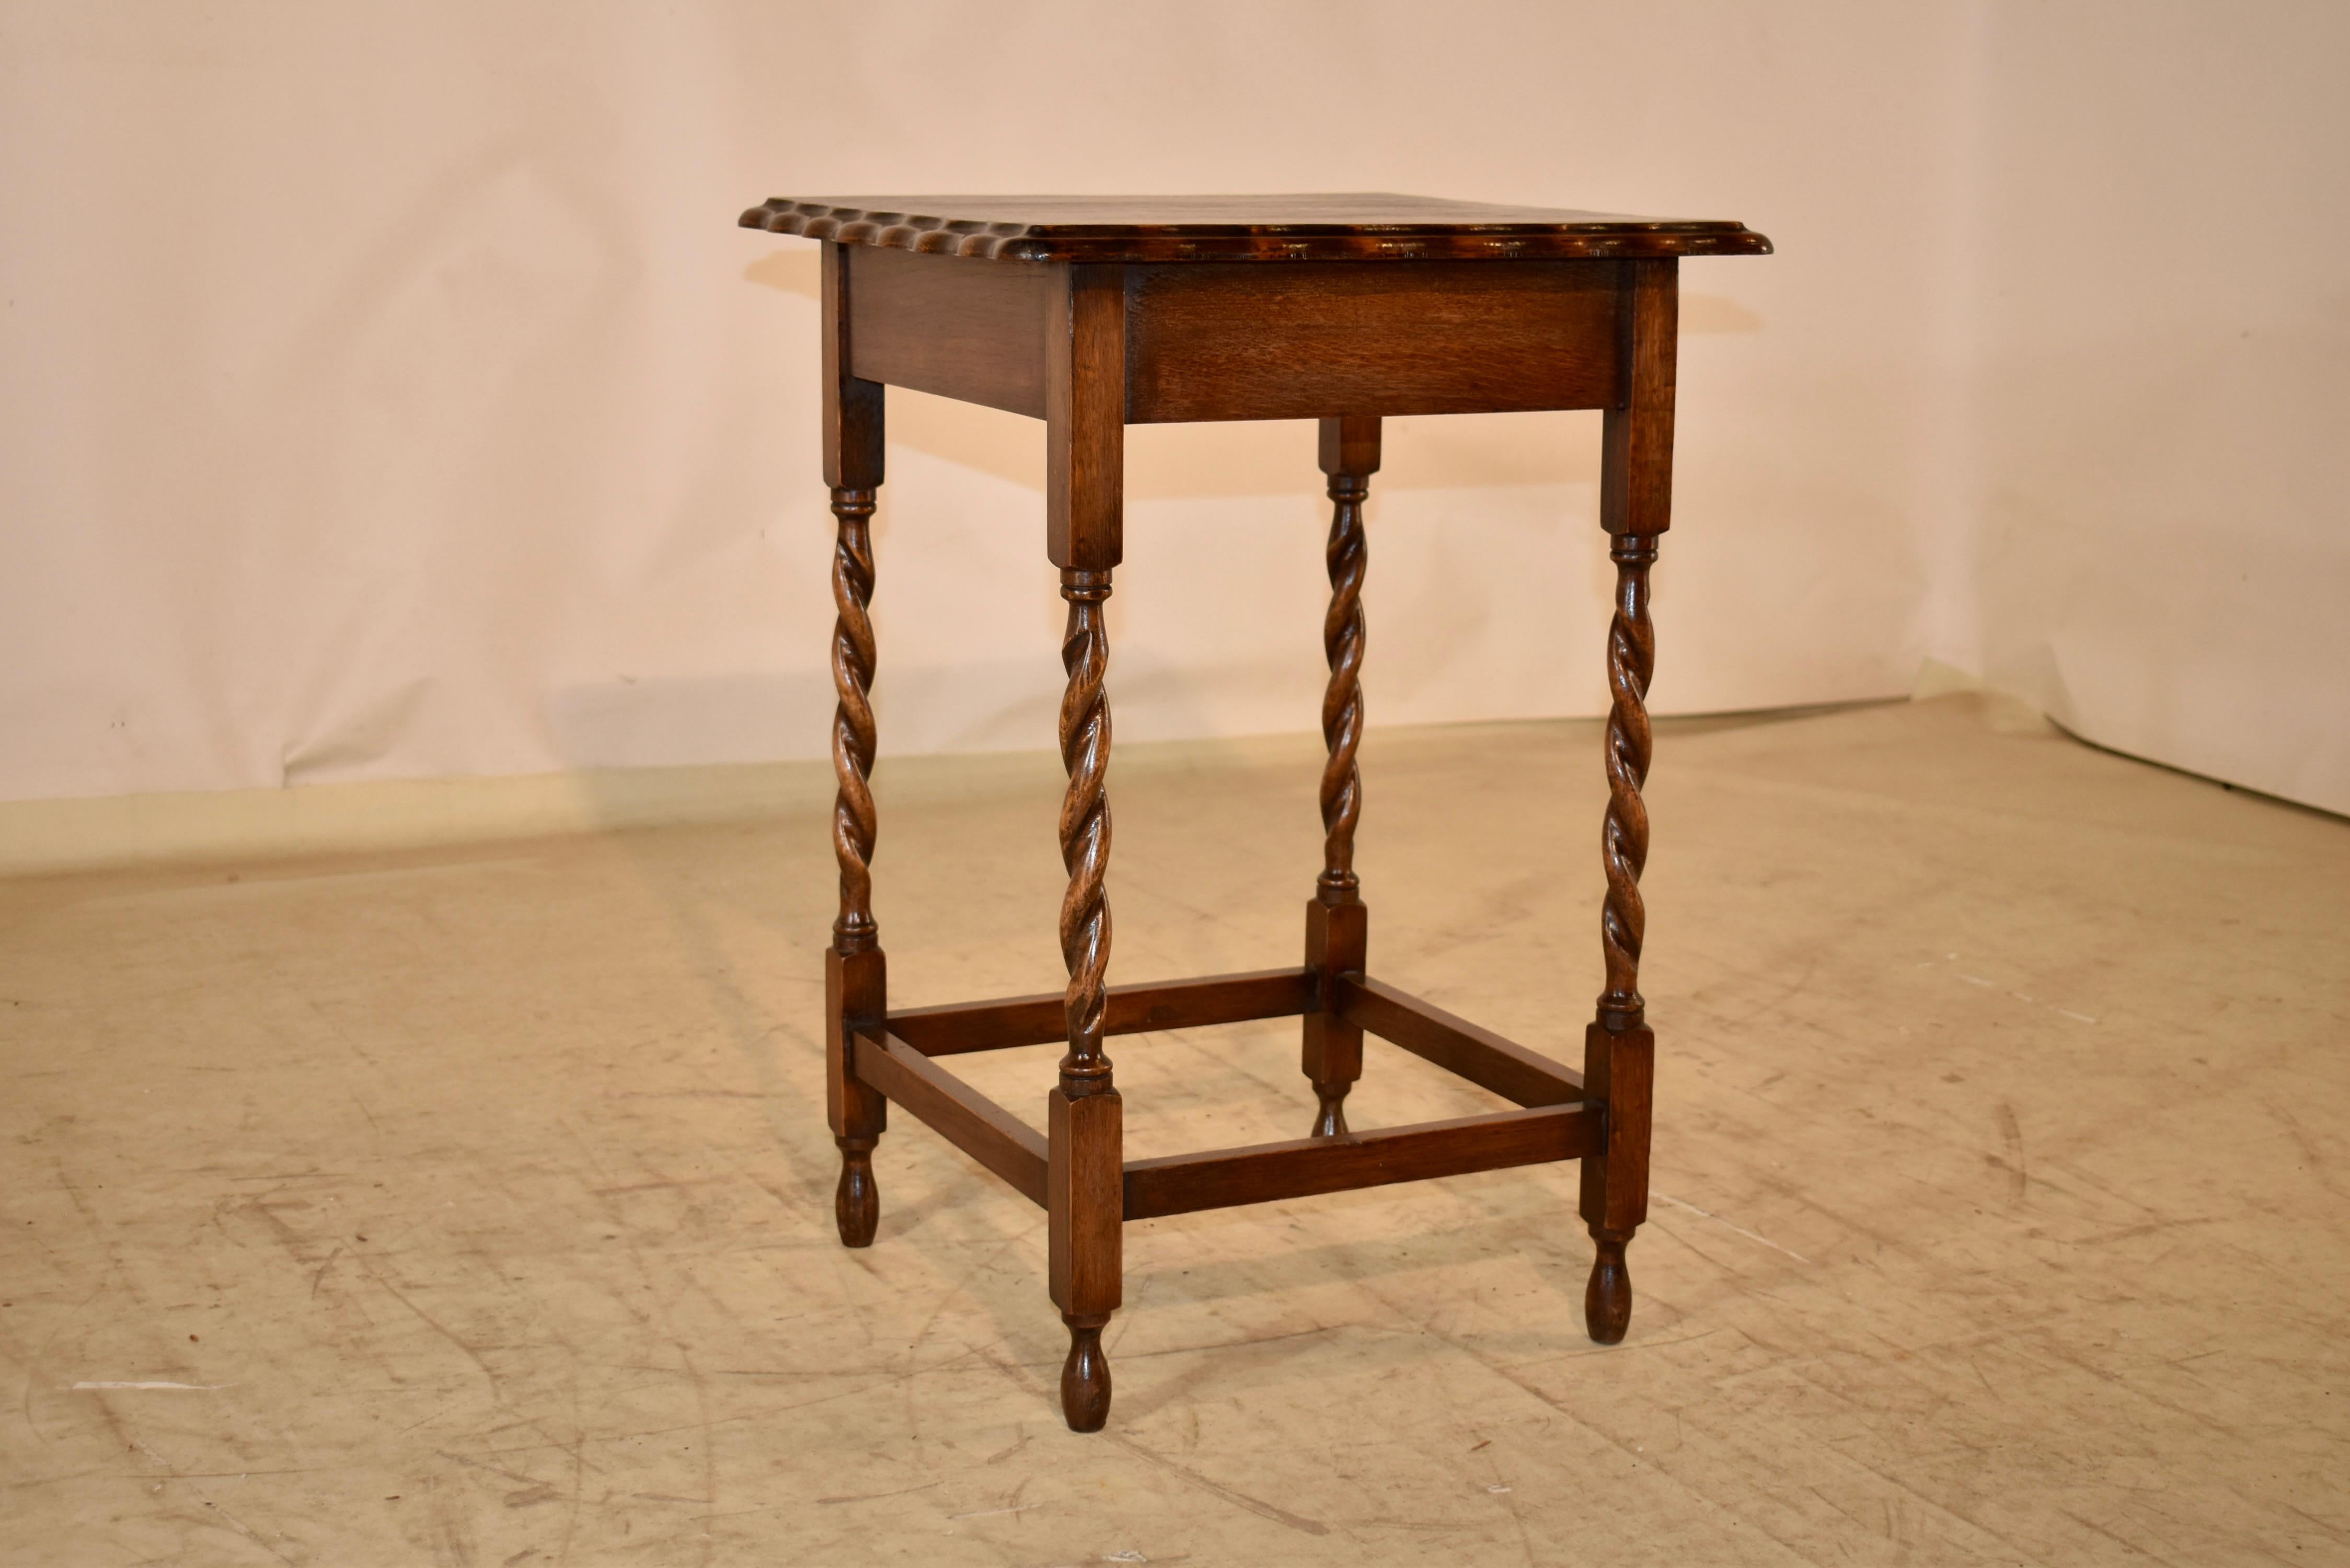 Circa 1900 Edwardian oak side table from England.  The top has a scalloped and beveled edge surrounding a wonderfully grained top.  This follows down to a simple apron and is supported on hand turned barley twist legs, joined by simple stretchers